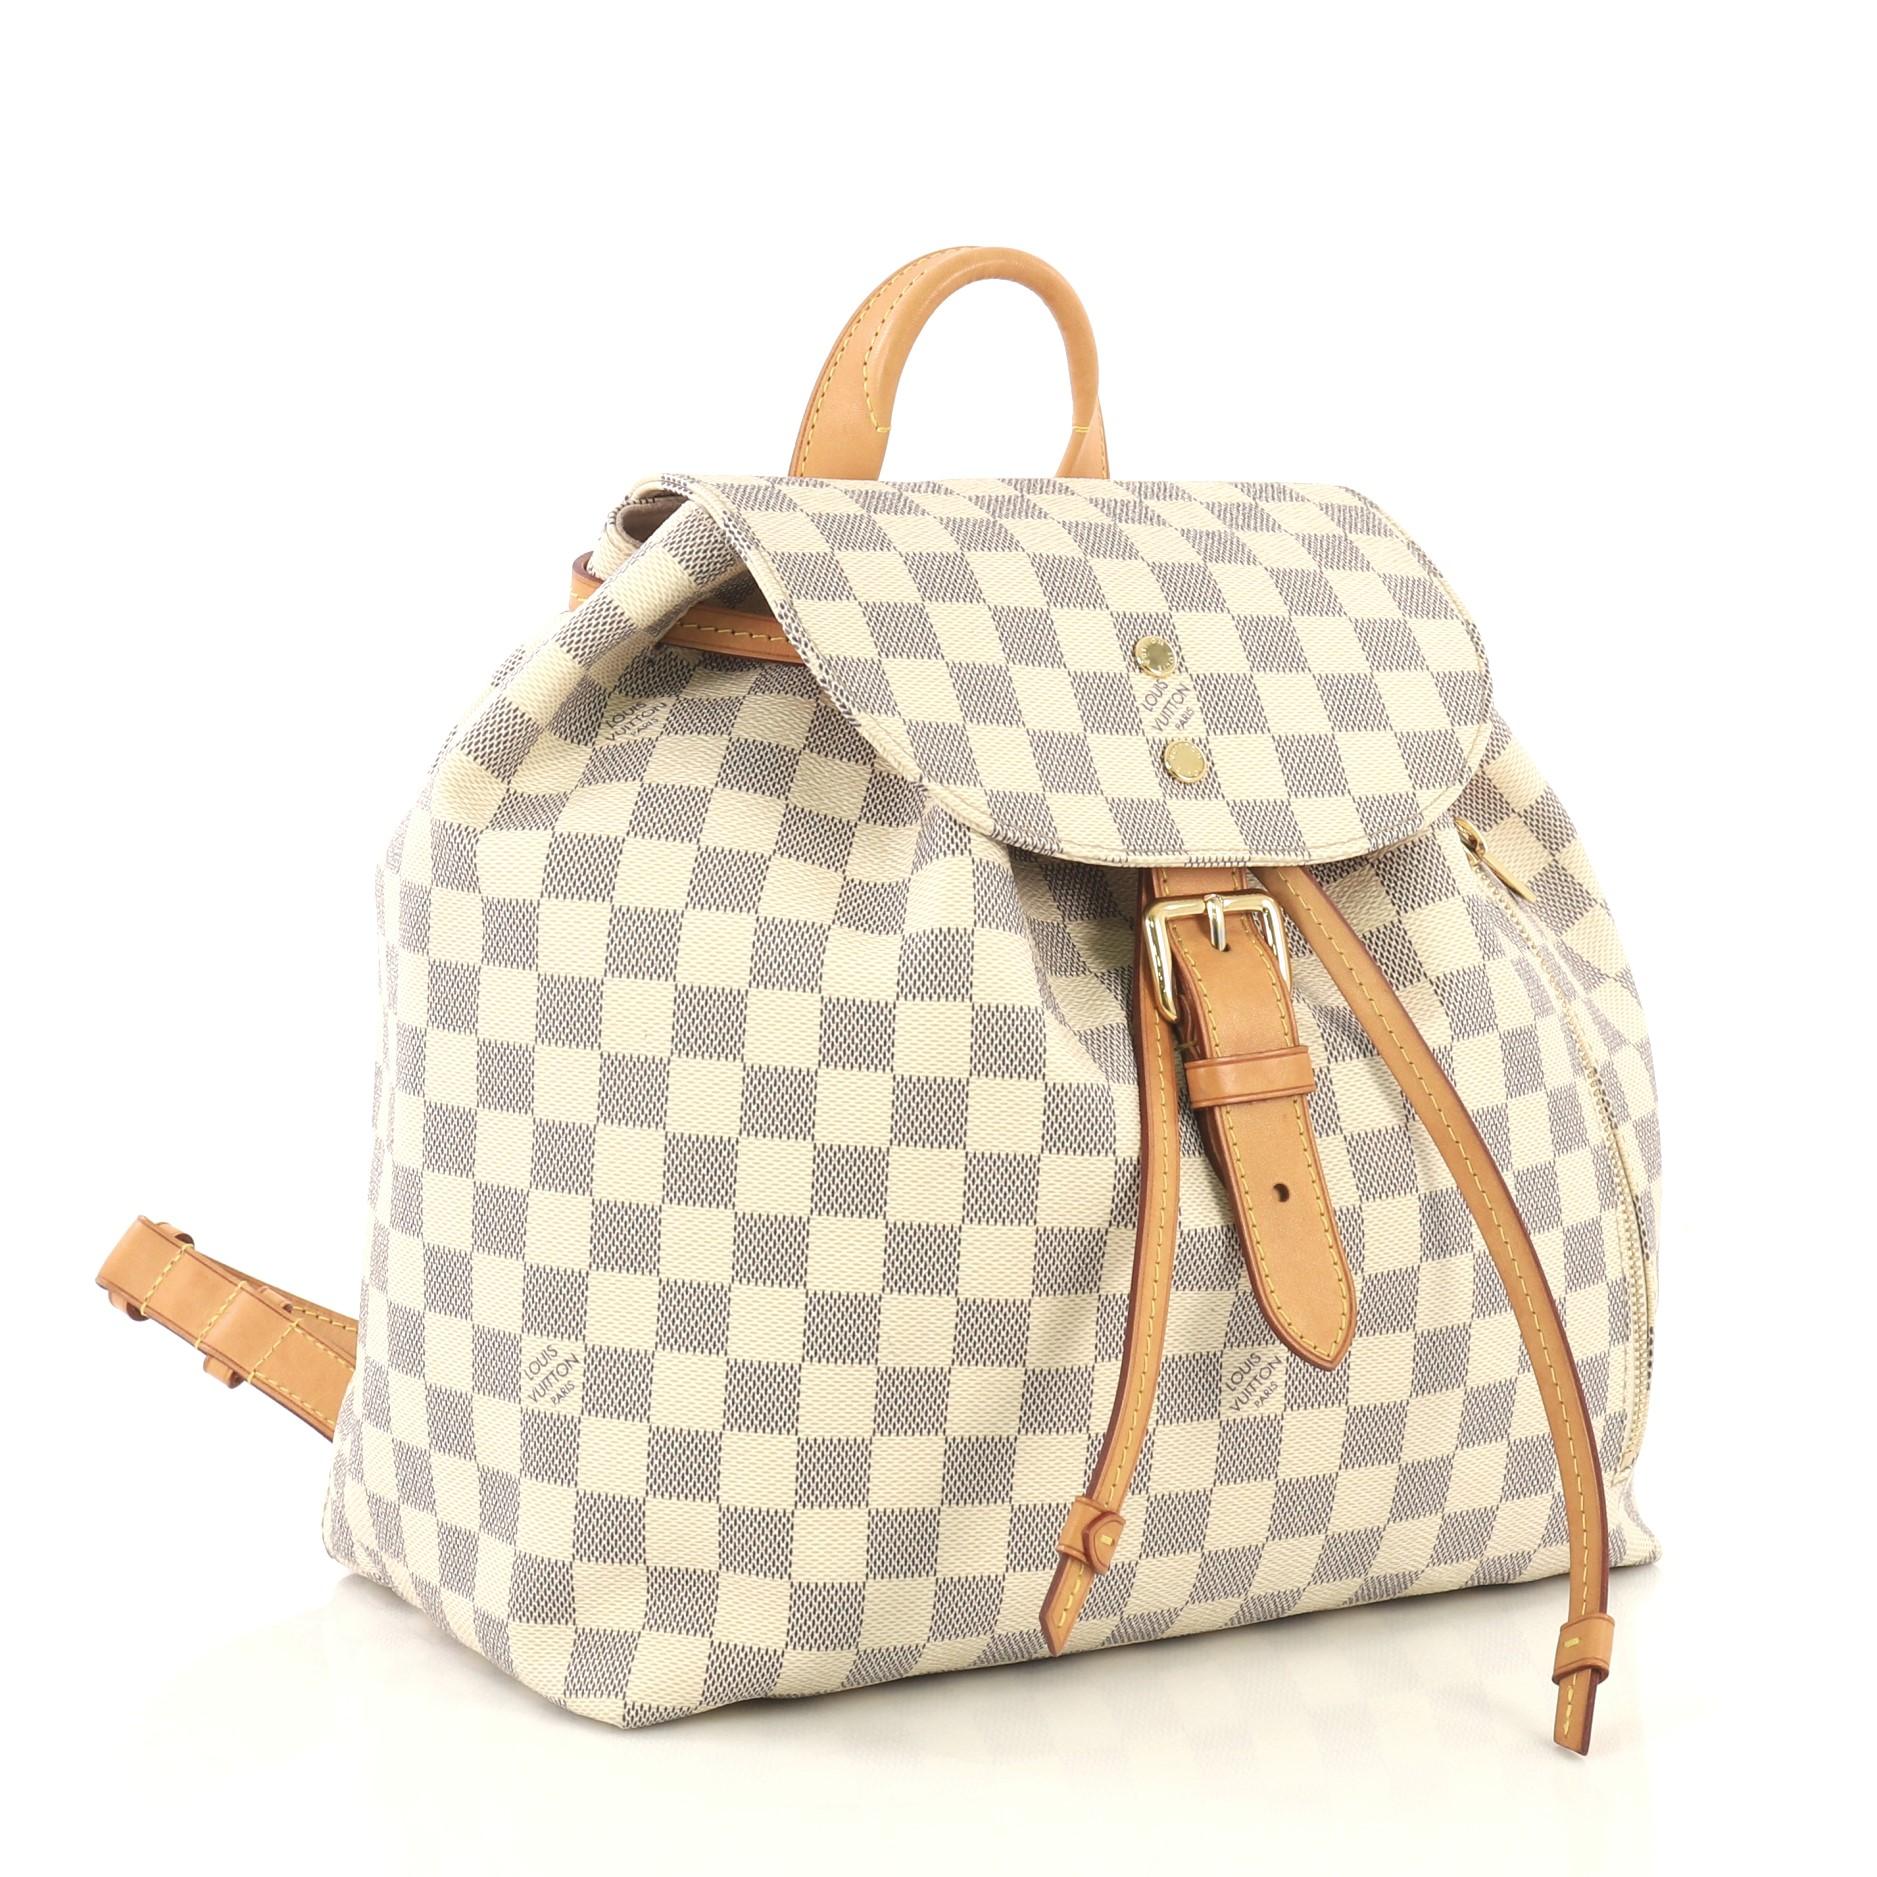 This Louis Vuitton Sperone Backpack Damier, crafted from damier azur coated canvas, features top leather handle, adjustable flat shoulder straps, exterior zip pocket, and gold-tone hardware. Its buckle and drawstring closure opens to a pink